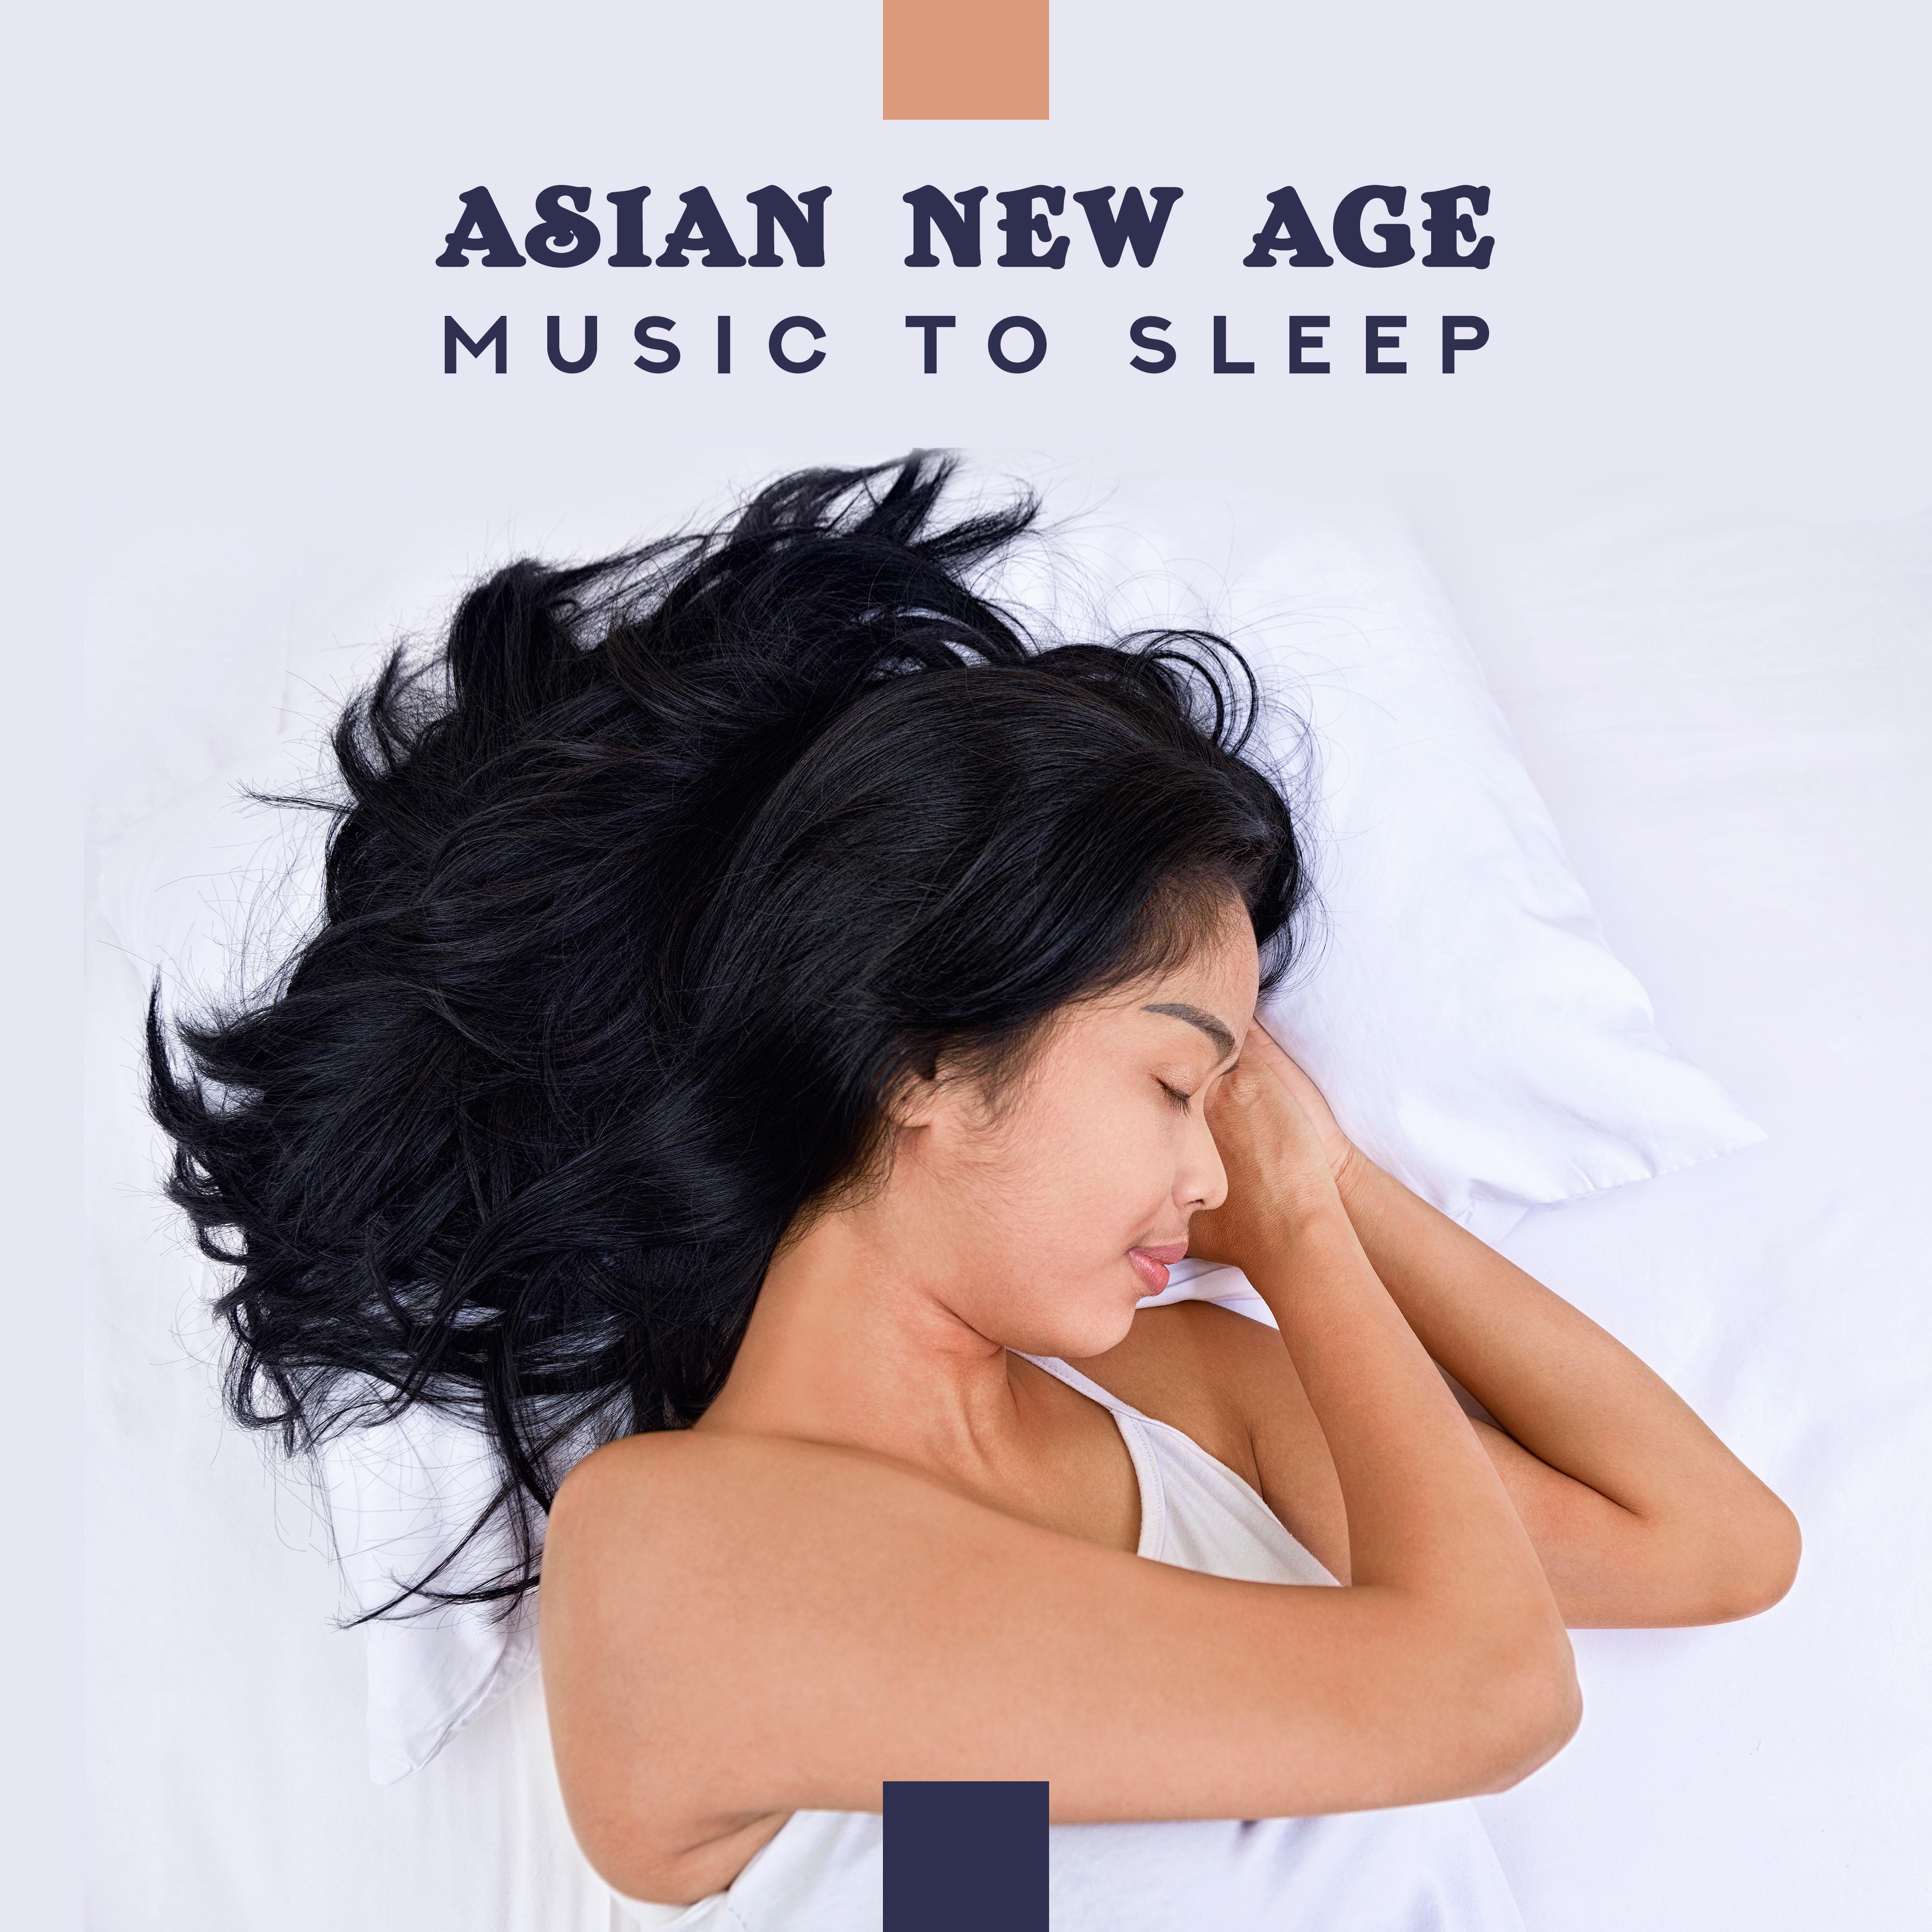 Asian New Age Music to Sleep - Soothing Sounds, Melodies for Sleep, Cure for Insomnia, Music for Sleep Disorders, Musical Set for a Nap